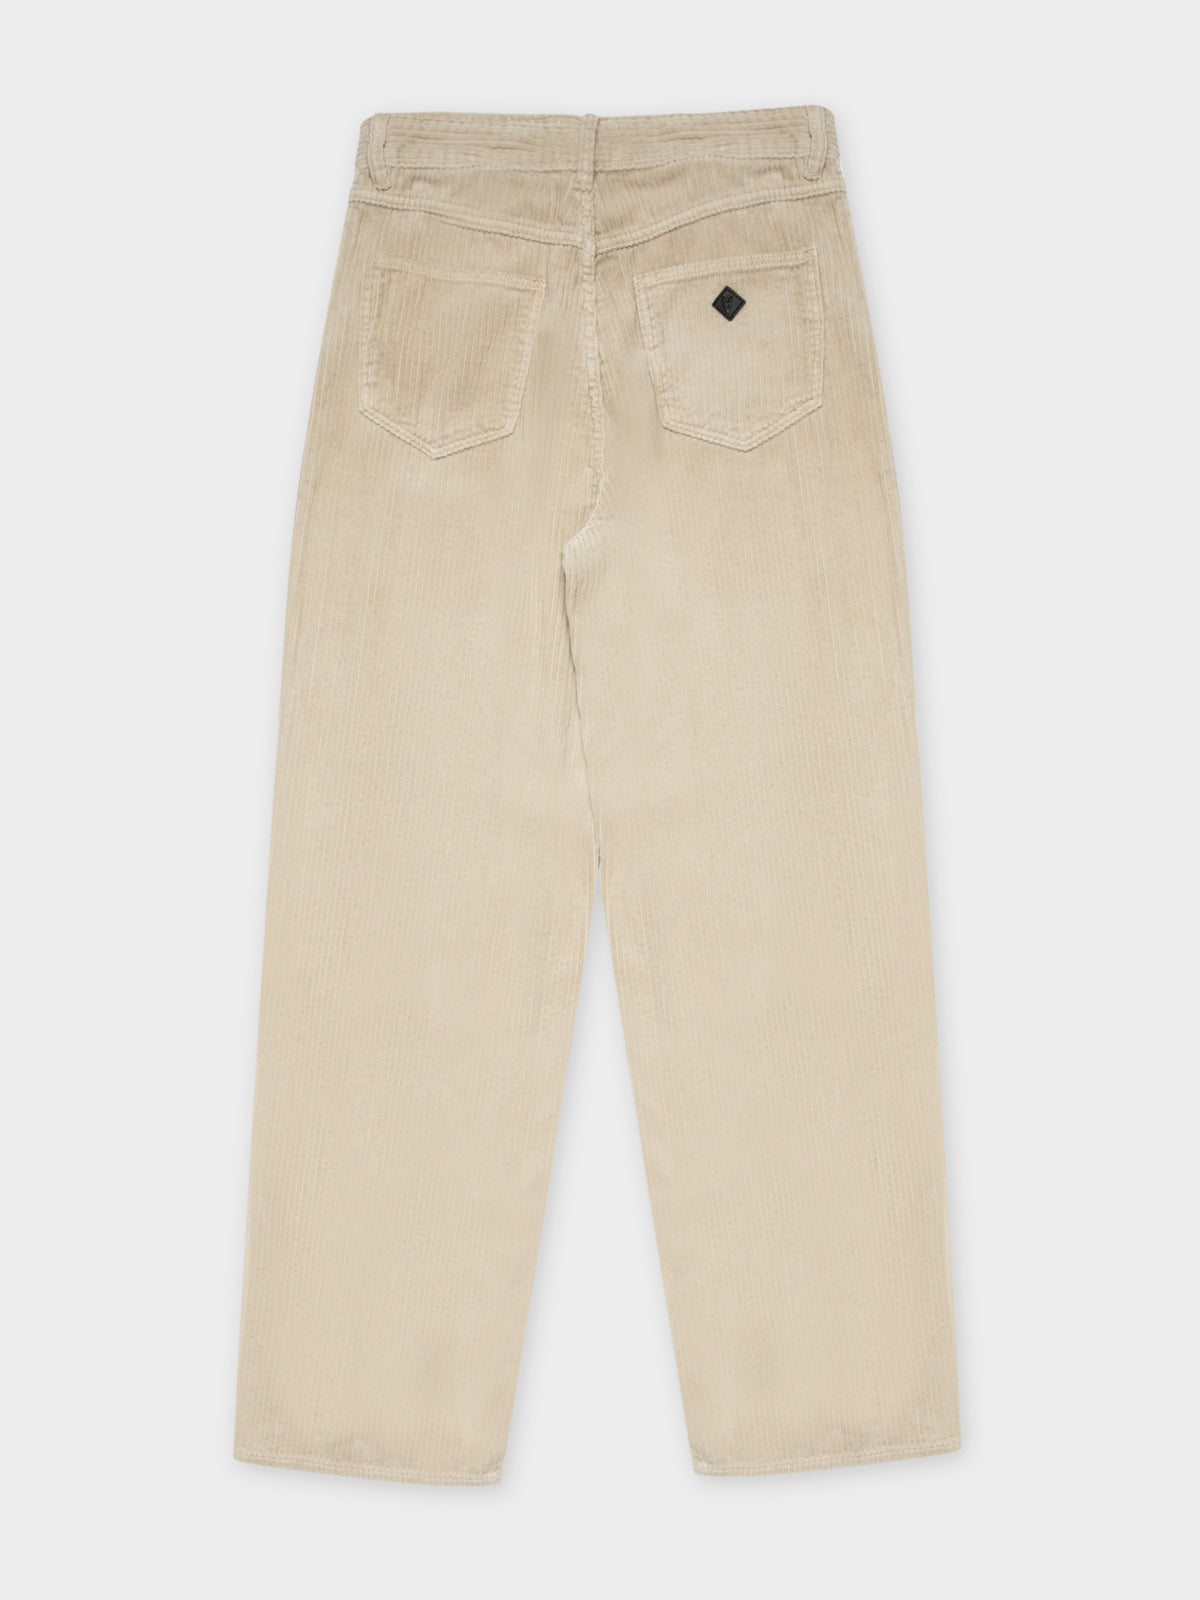 A Slouch Jeans in Sand Corduroy